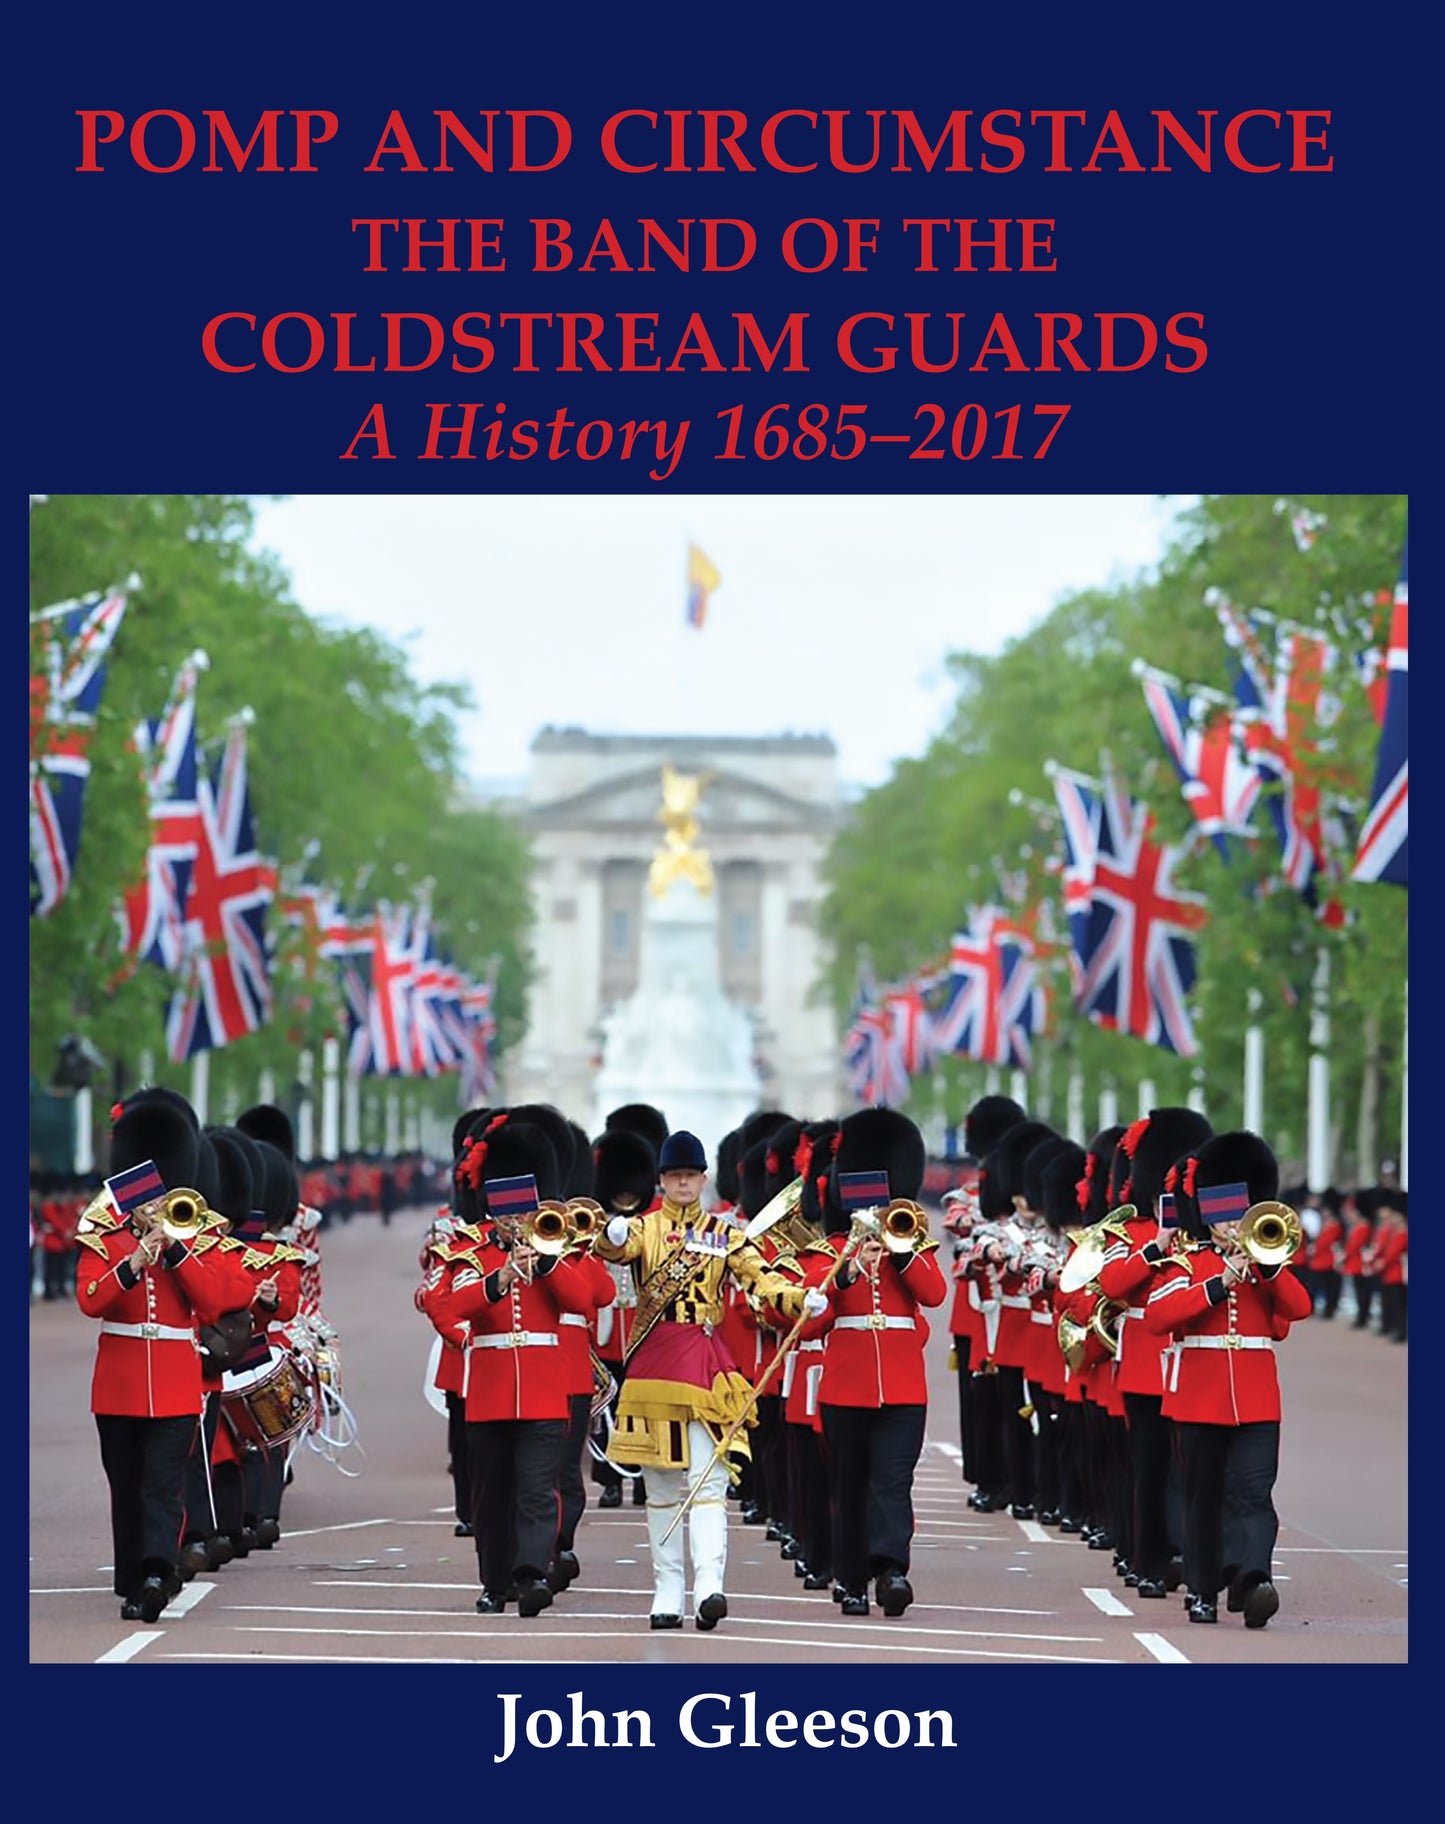 History Of The Coldstream Guards Band 1685-2017